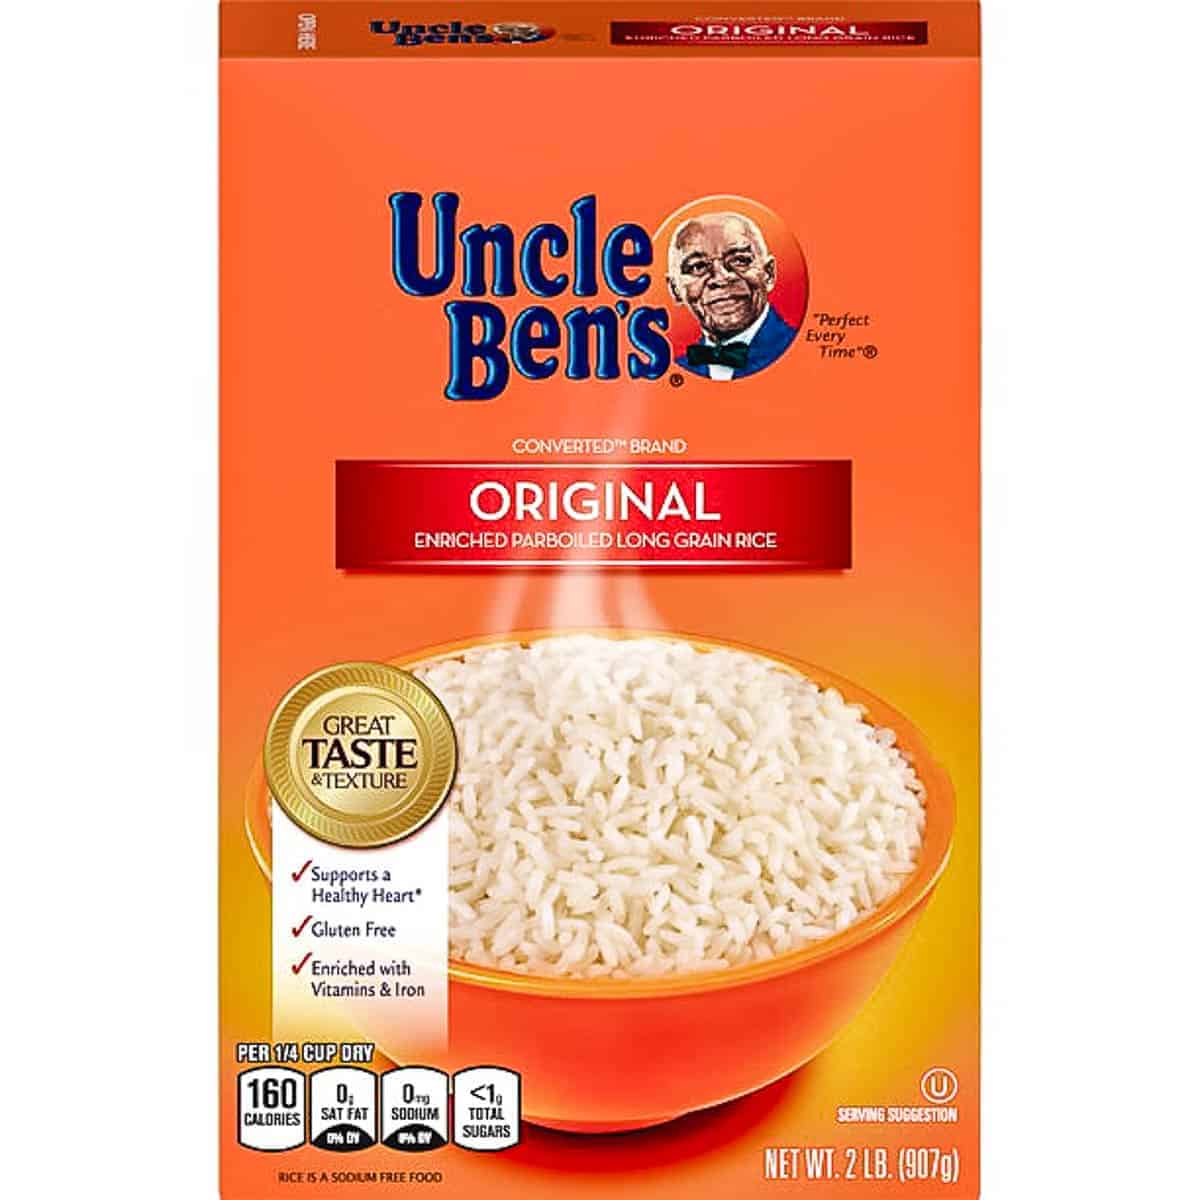 A box of Uncle Ben's rice.